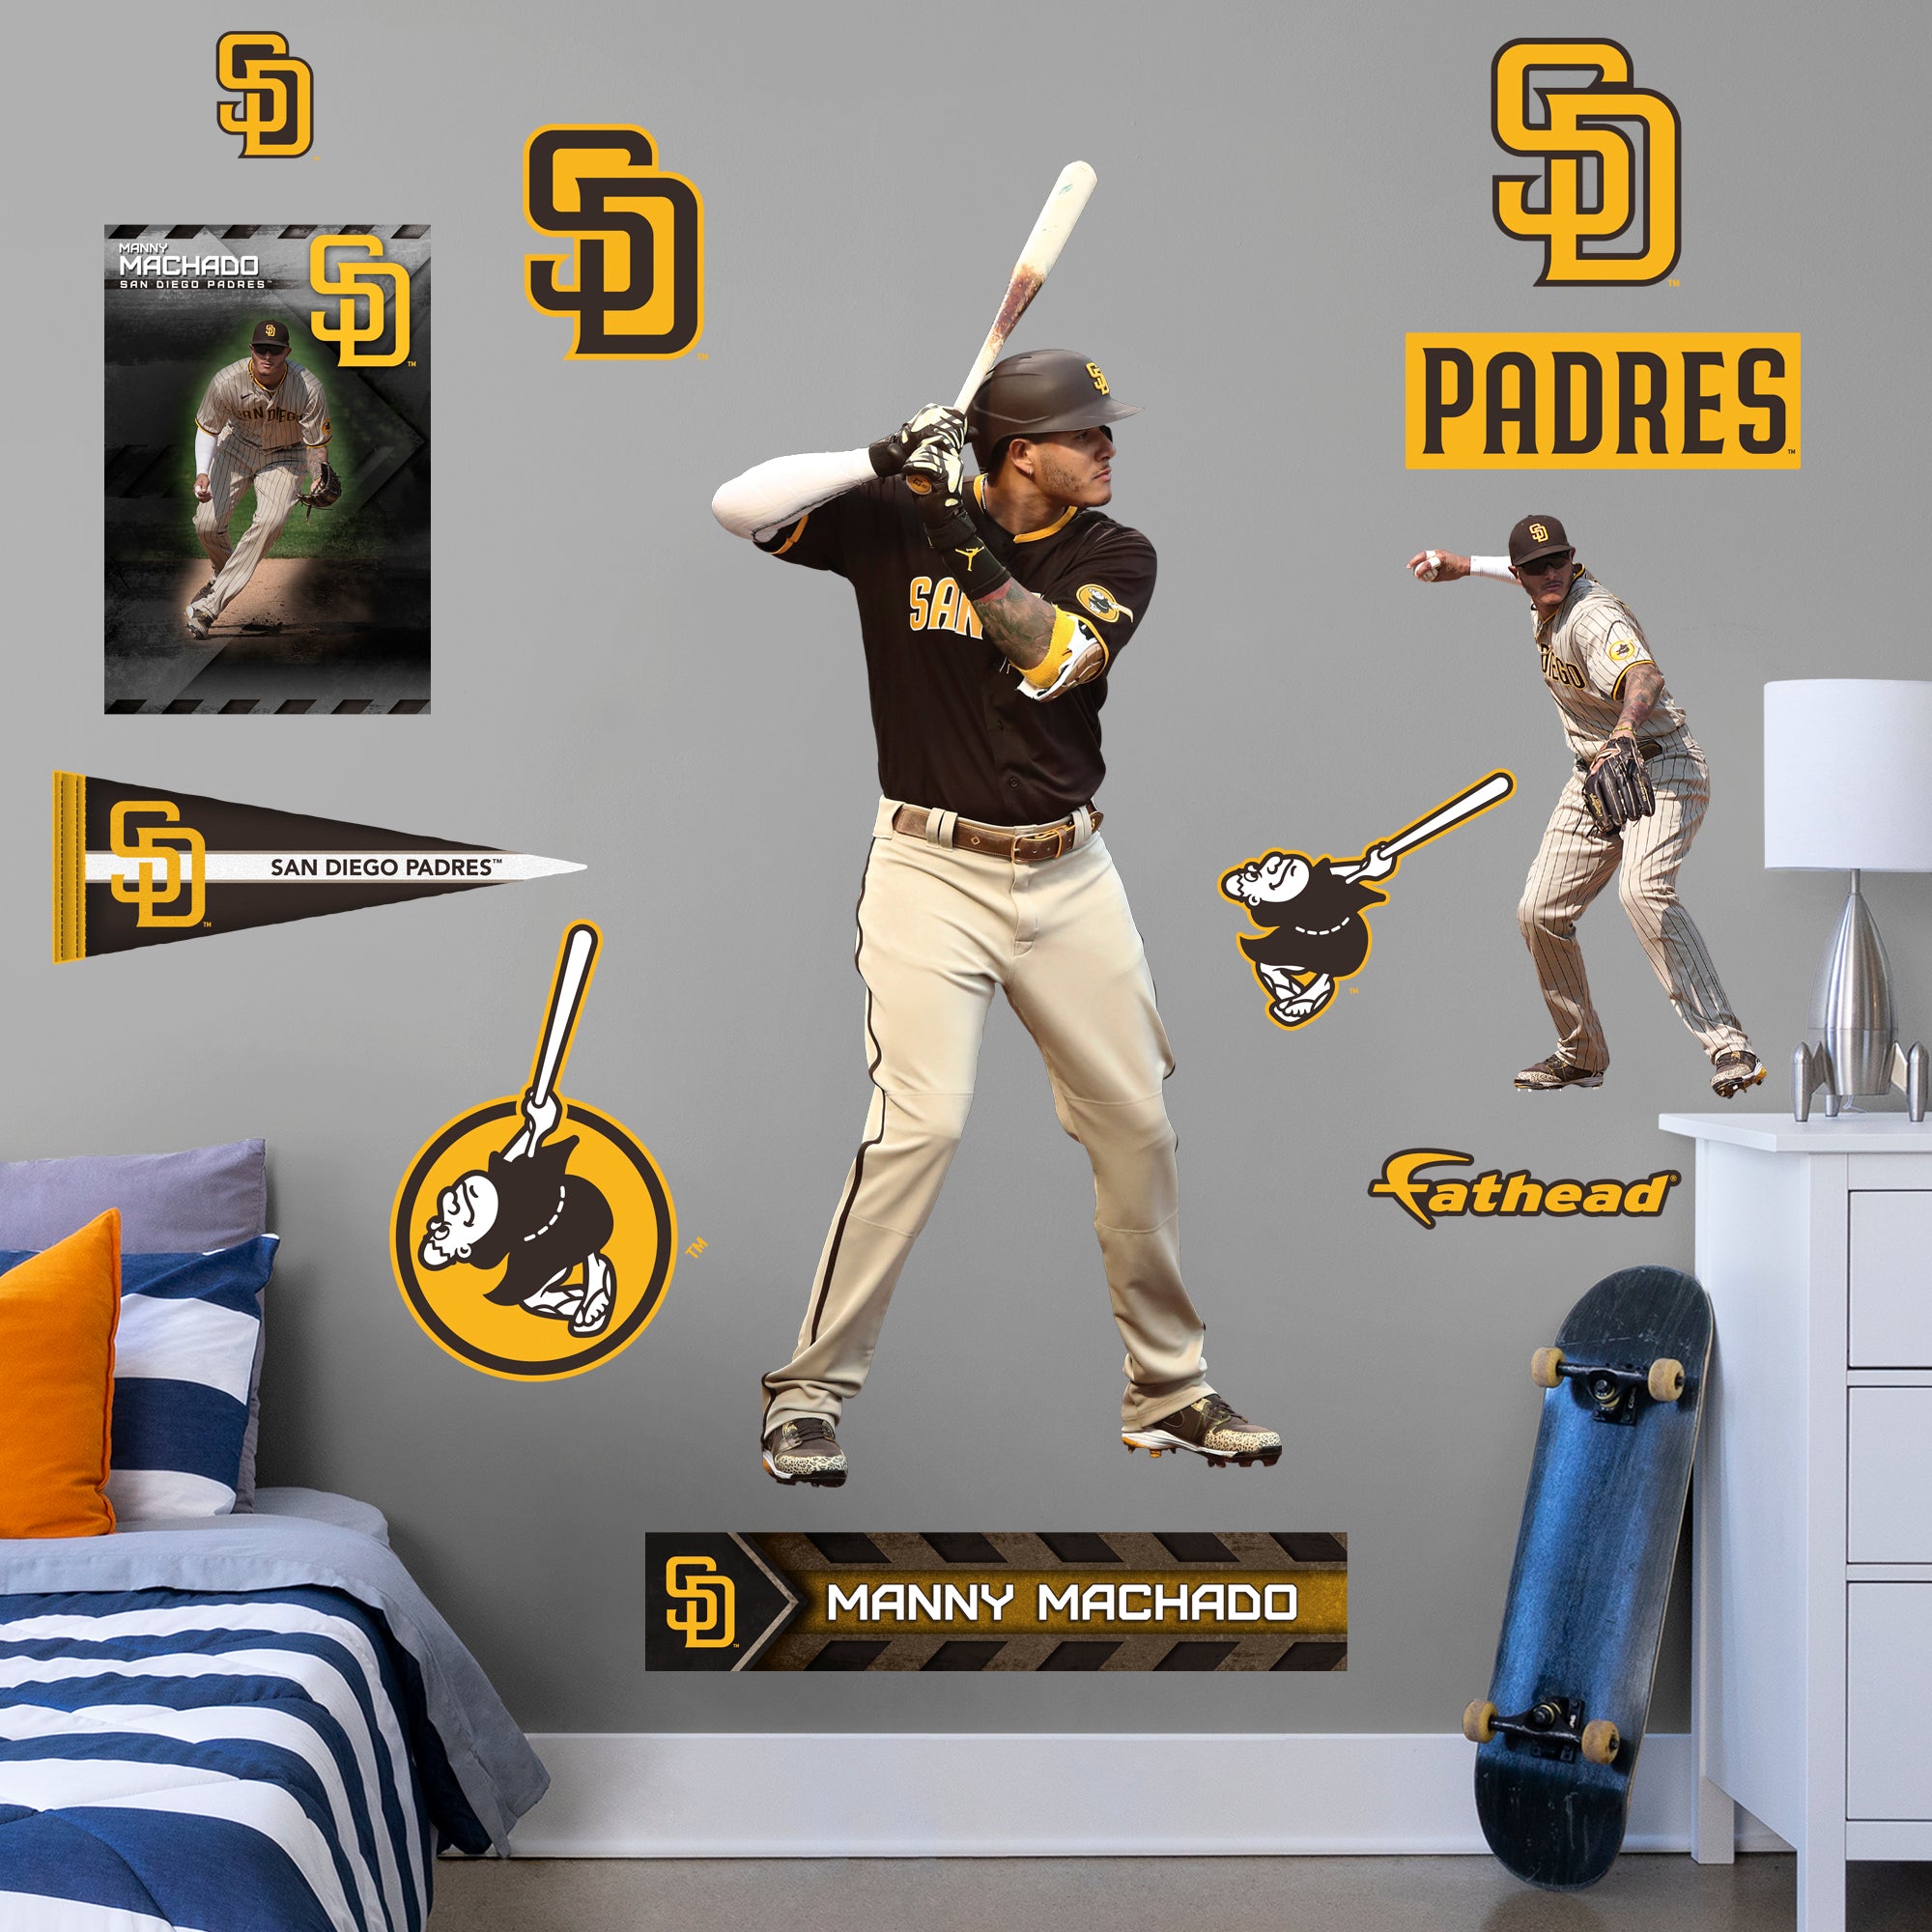 Manny Machado for San Diego Padres: RealBig Officially Licensed MLB Removable Wall Decal Life-Size Athlete + 11 Decals by Fathea